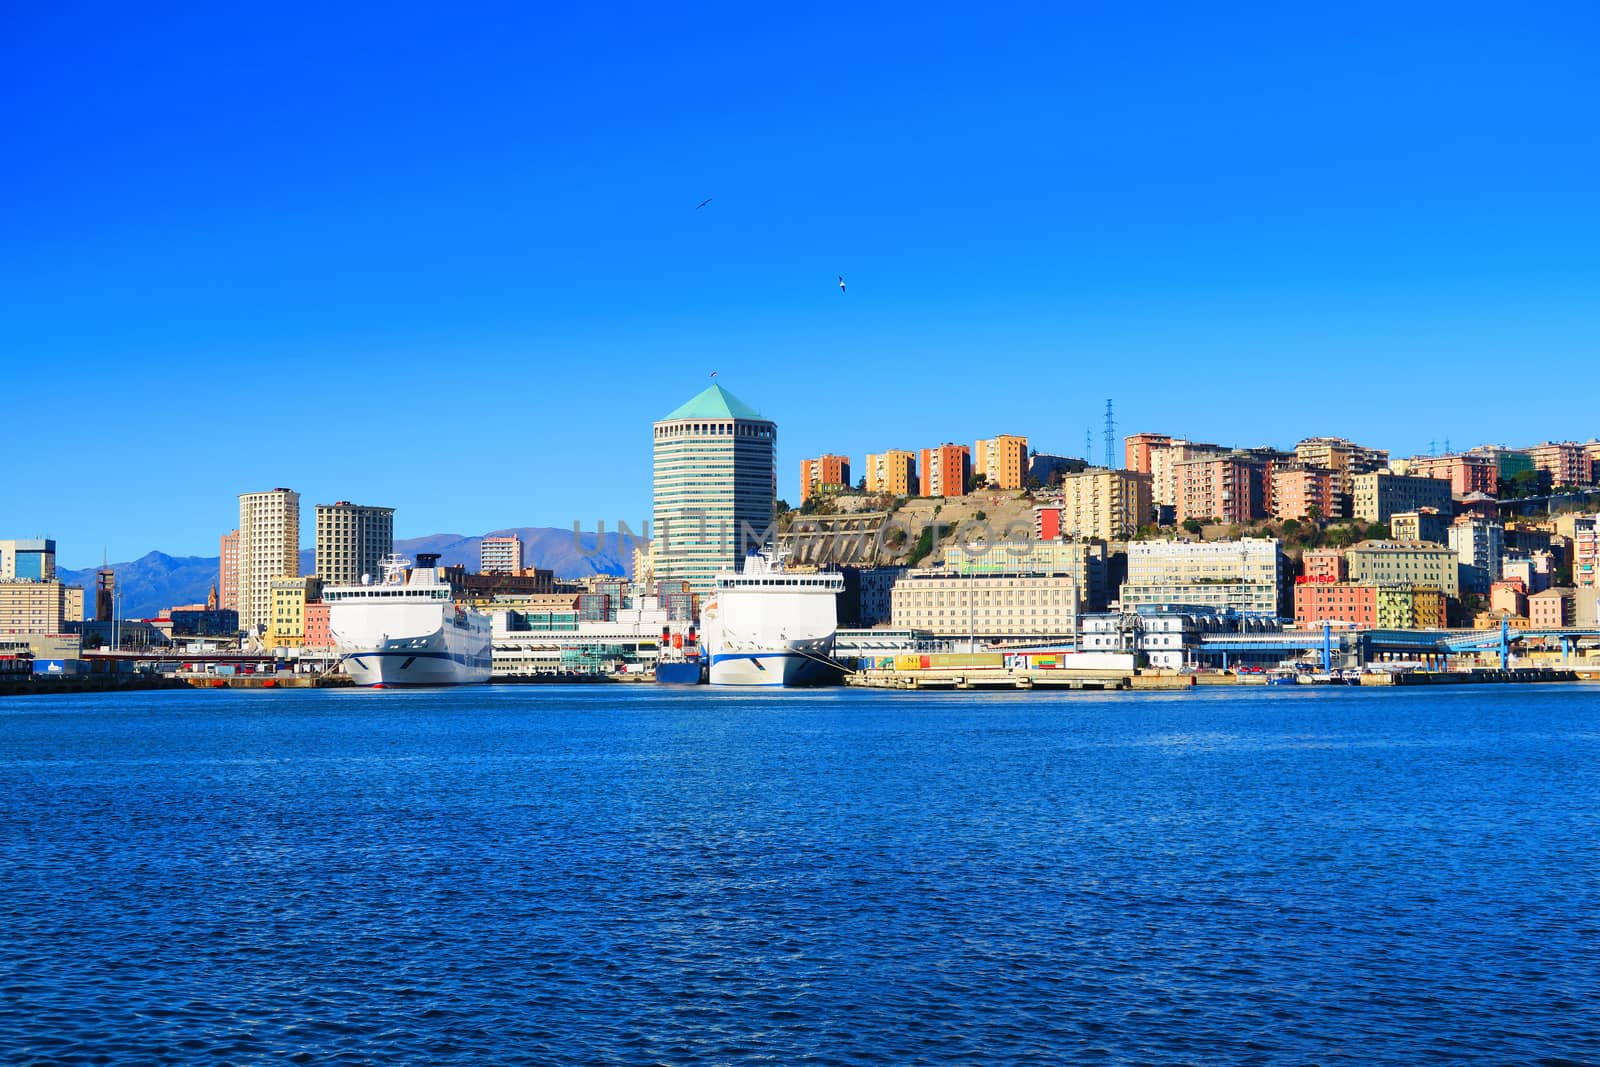 View of the port of Genoa, Italy by dav76